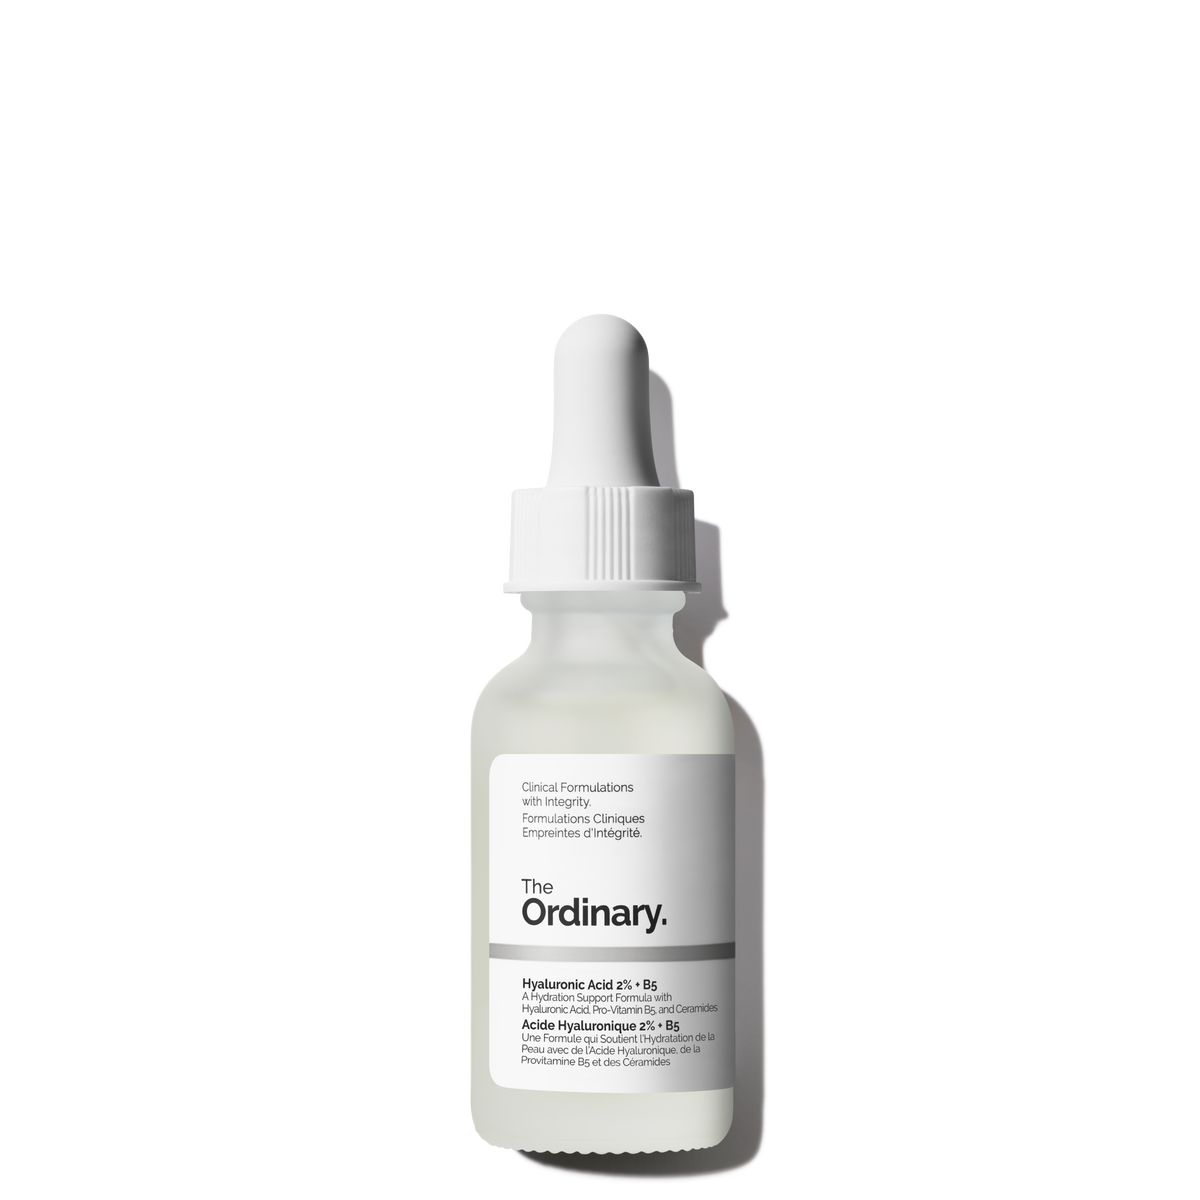 The OrdinaryHyaluronic Acid 2% + B5 | The Ordinary